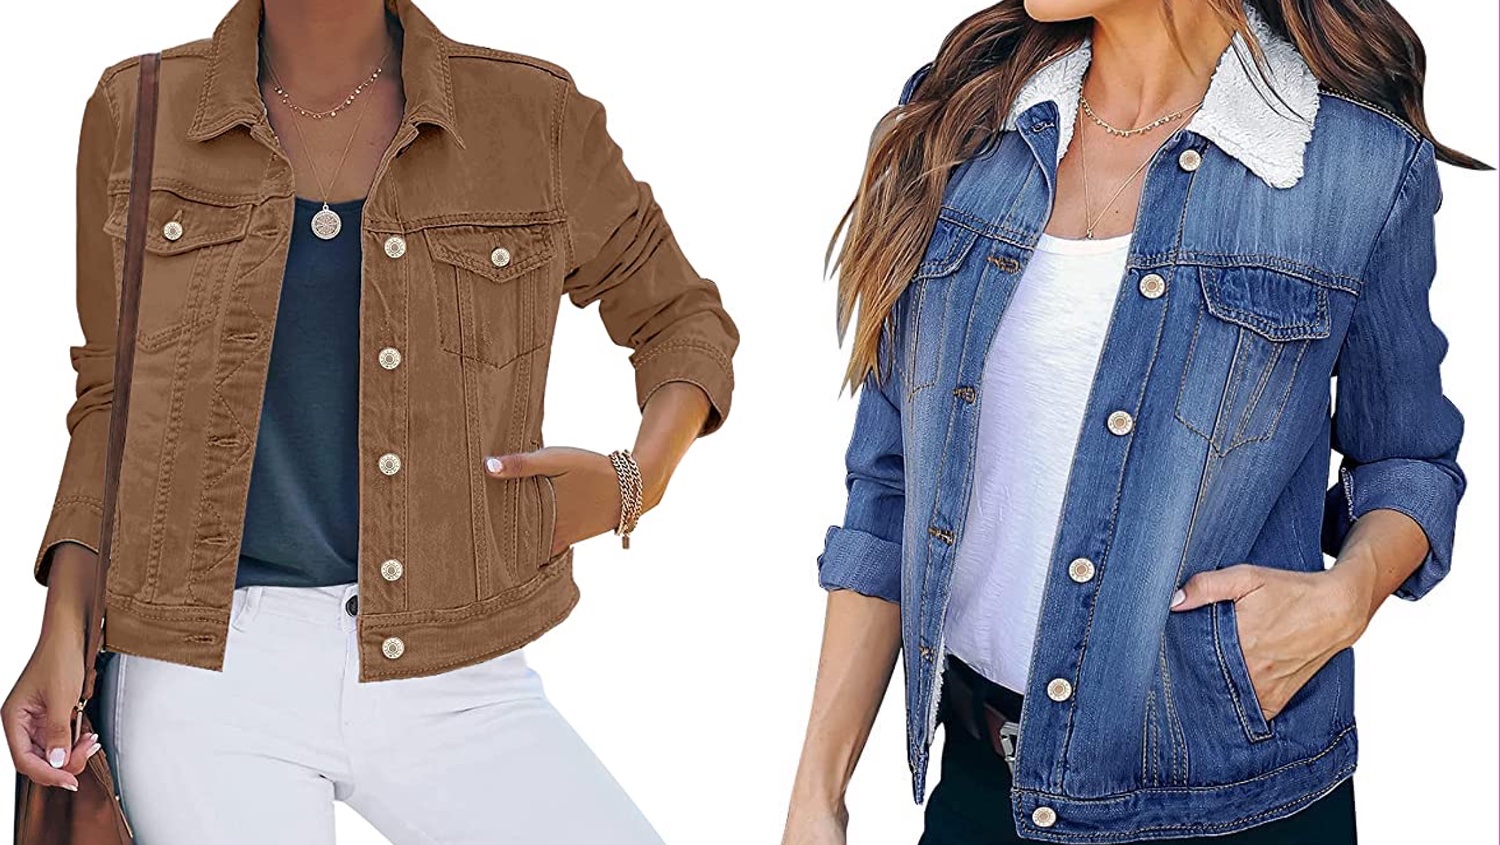 Denim jacket in two colors